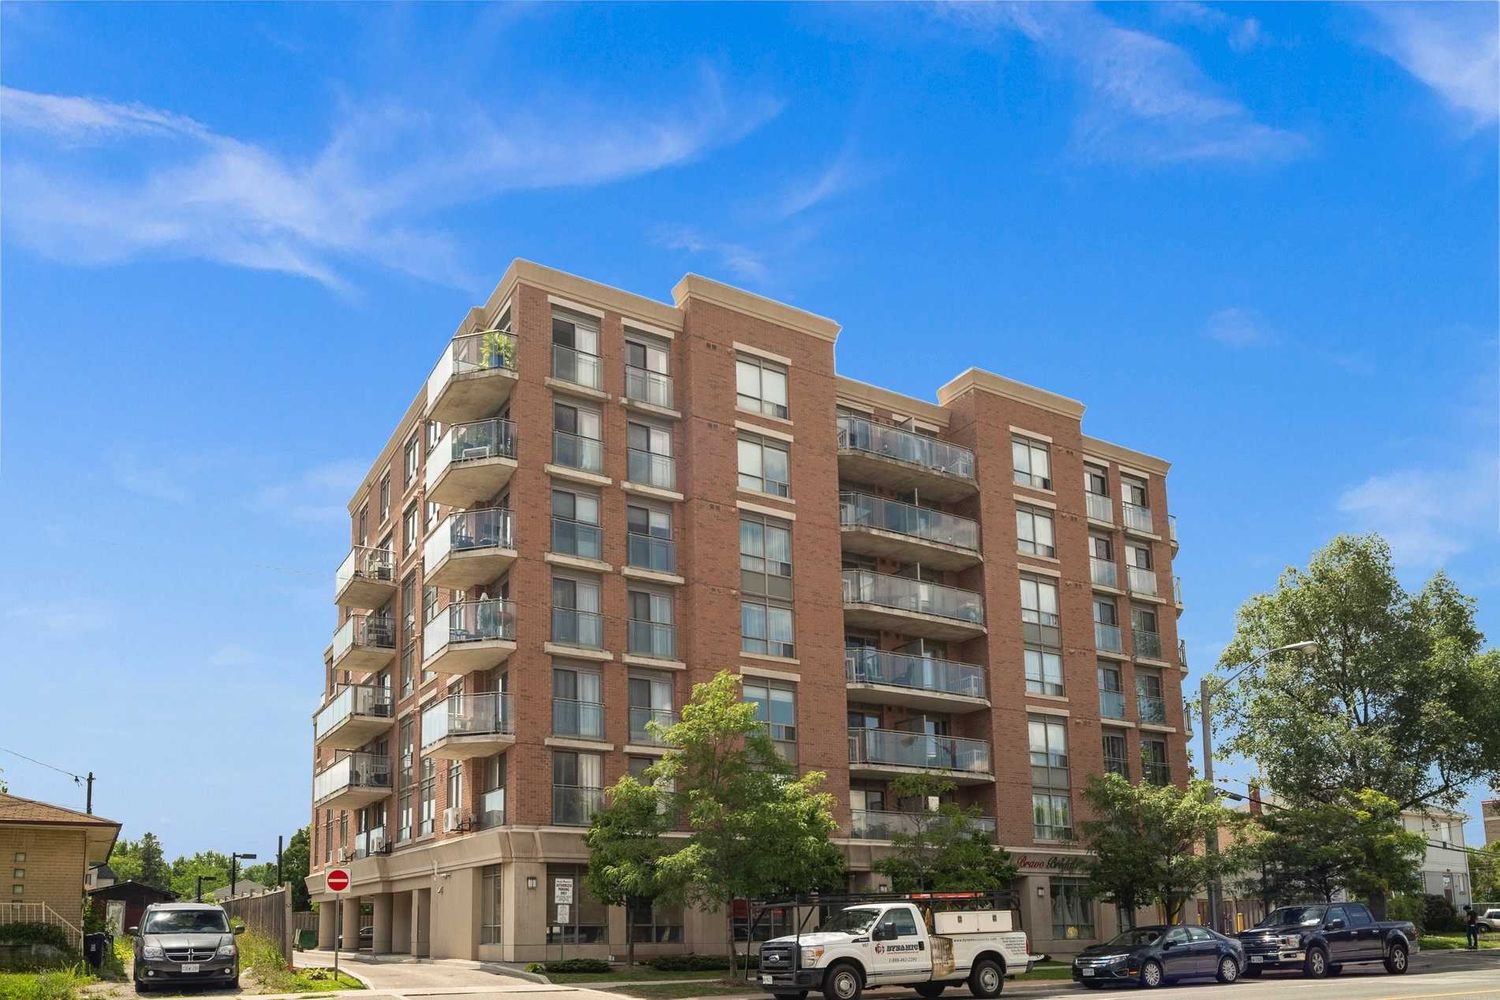 801 Sheppard Avenue. Acclaim Condos is located in  North York, Toronto - image #1 of 2